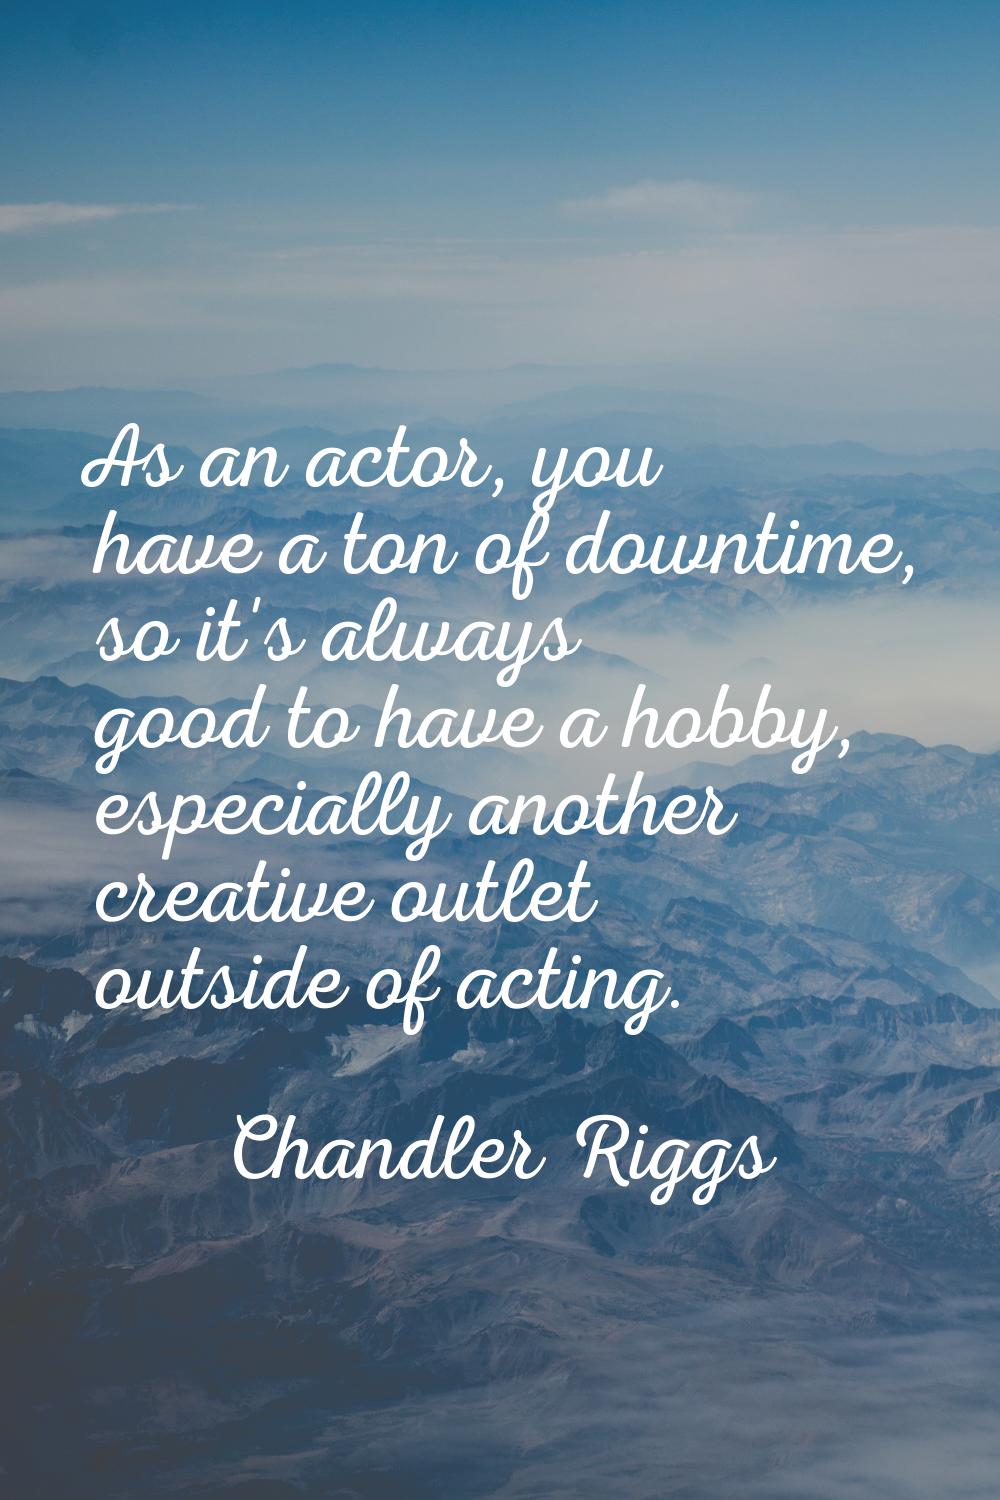 As an actor, you have a ton of downtime, so it's always good to have a hobby, especially another cr